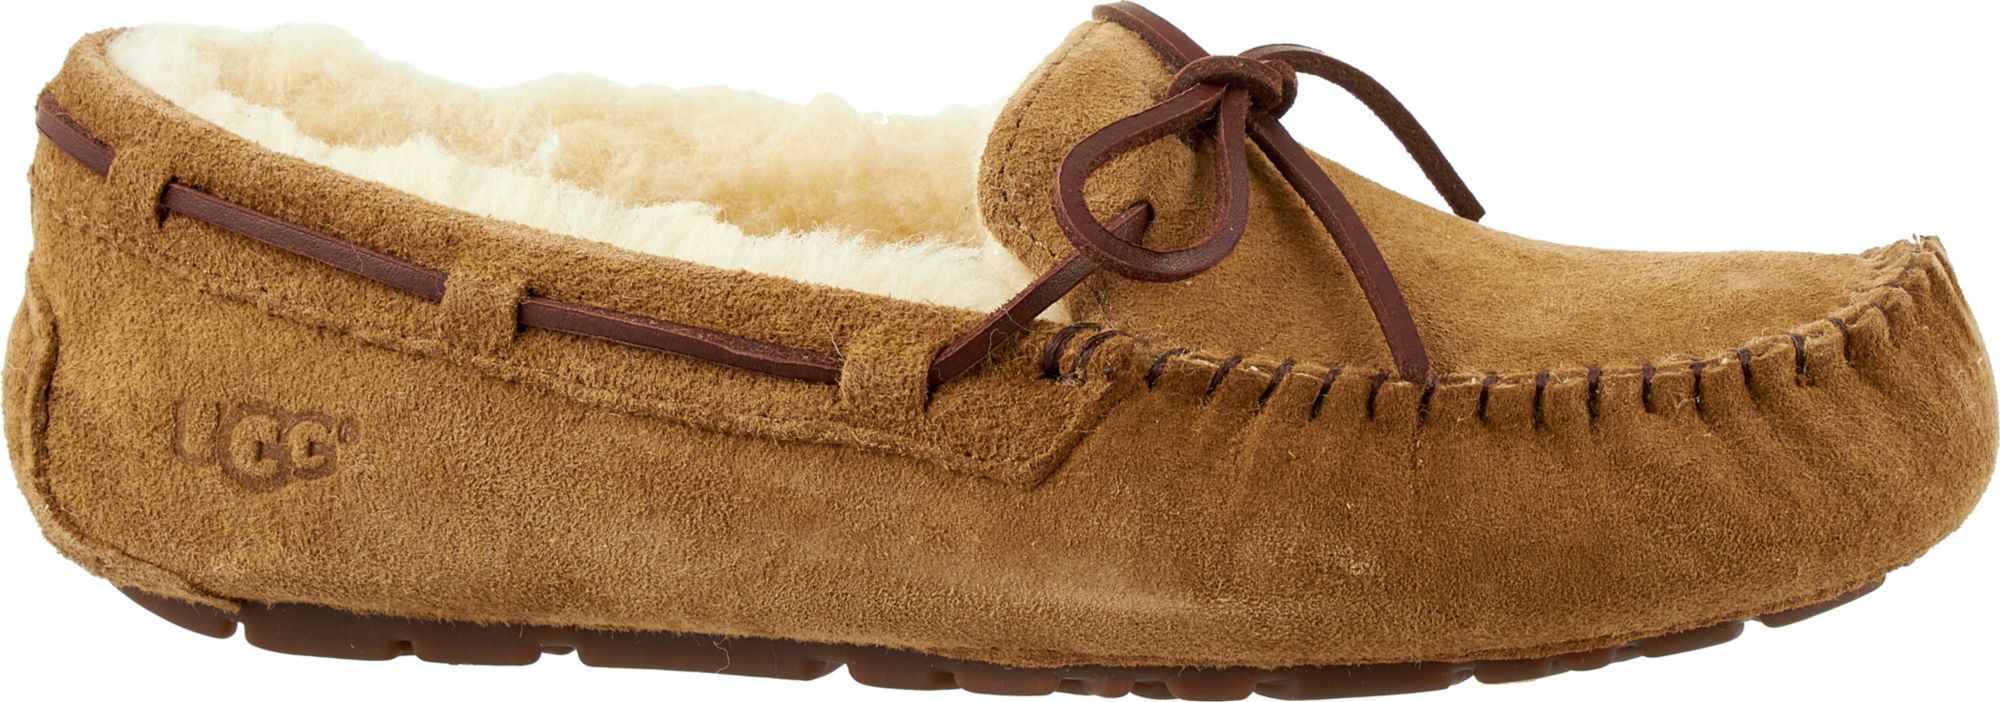 uggs moccasin slippers